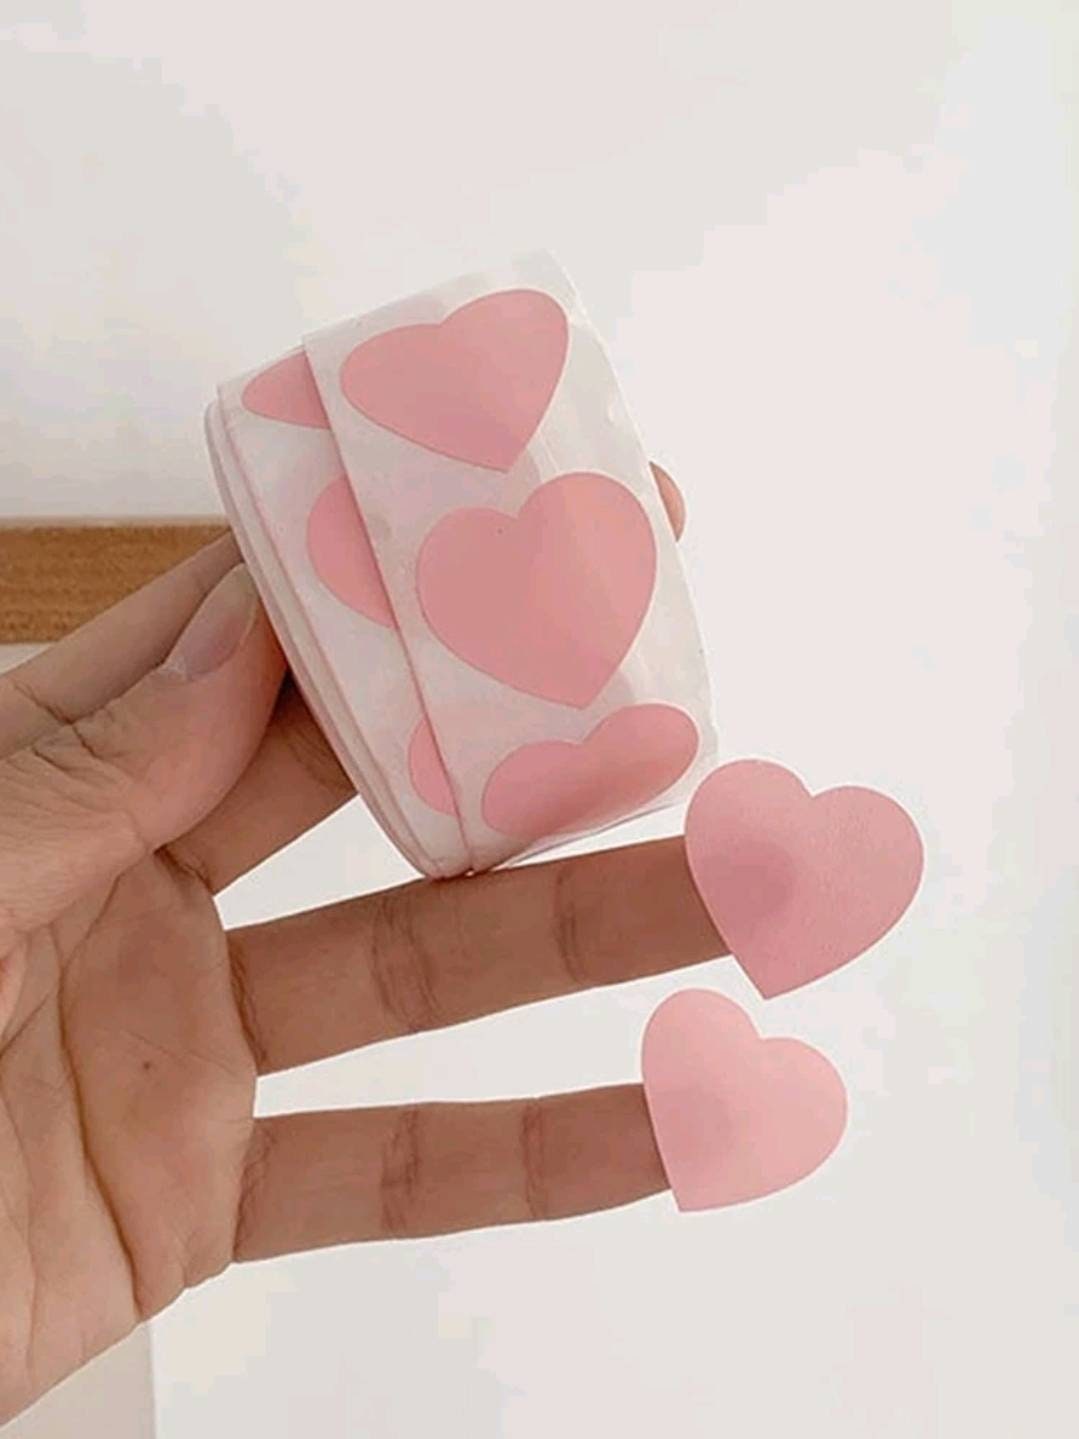 6mm Pearl Hearts Self Adhesive Stick on Craft Sticker Gems for Wedding  Invites 